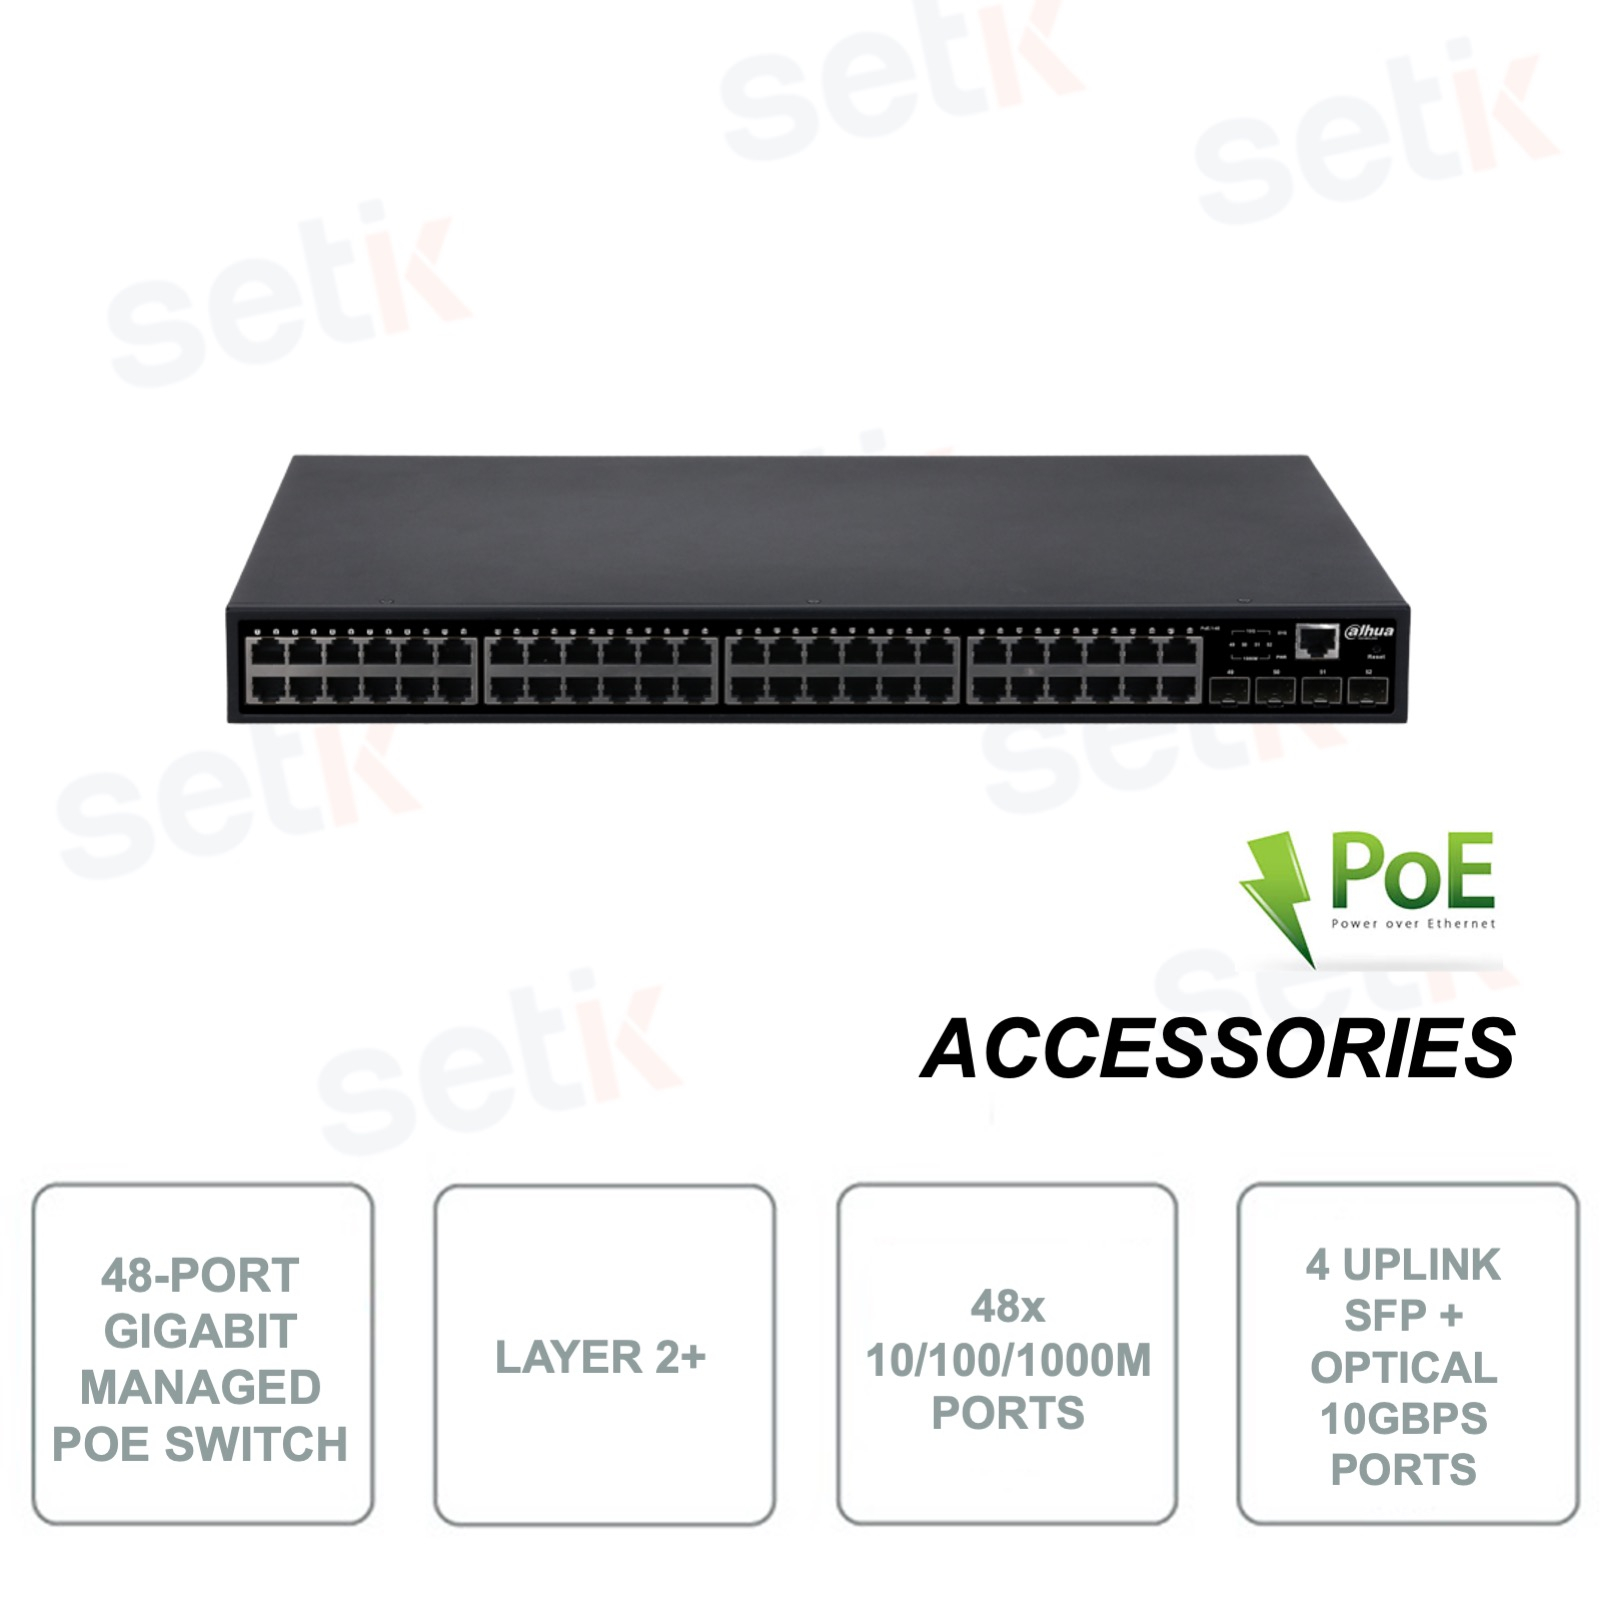 Ports Network 4 Fiber Uplink for Optical + 10Gbps Commercial - Switch Manageable 48 SFP PoE Ports Dahua + - - PFS5452-48GT4XF-400